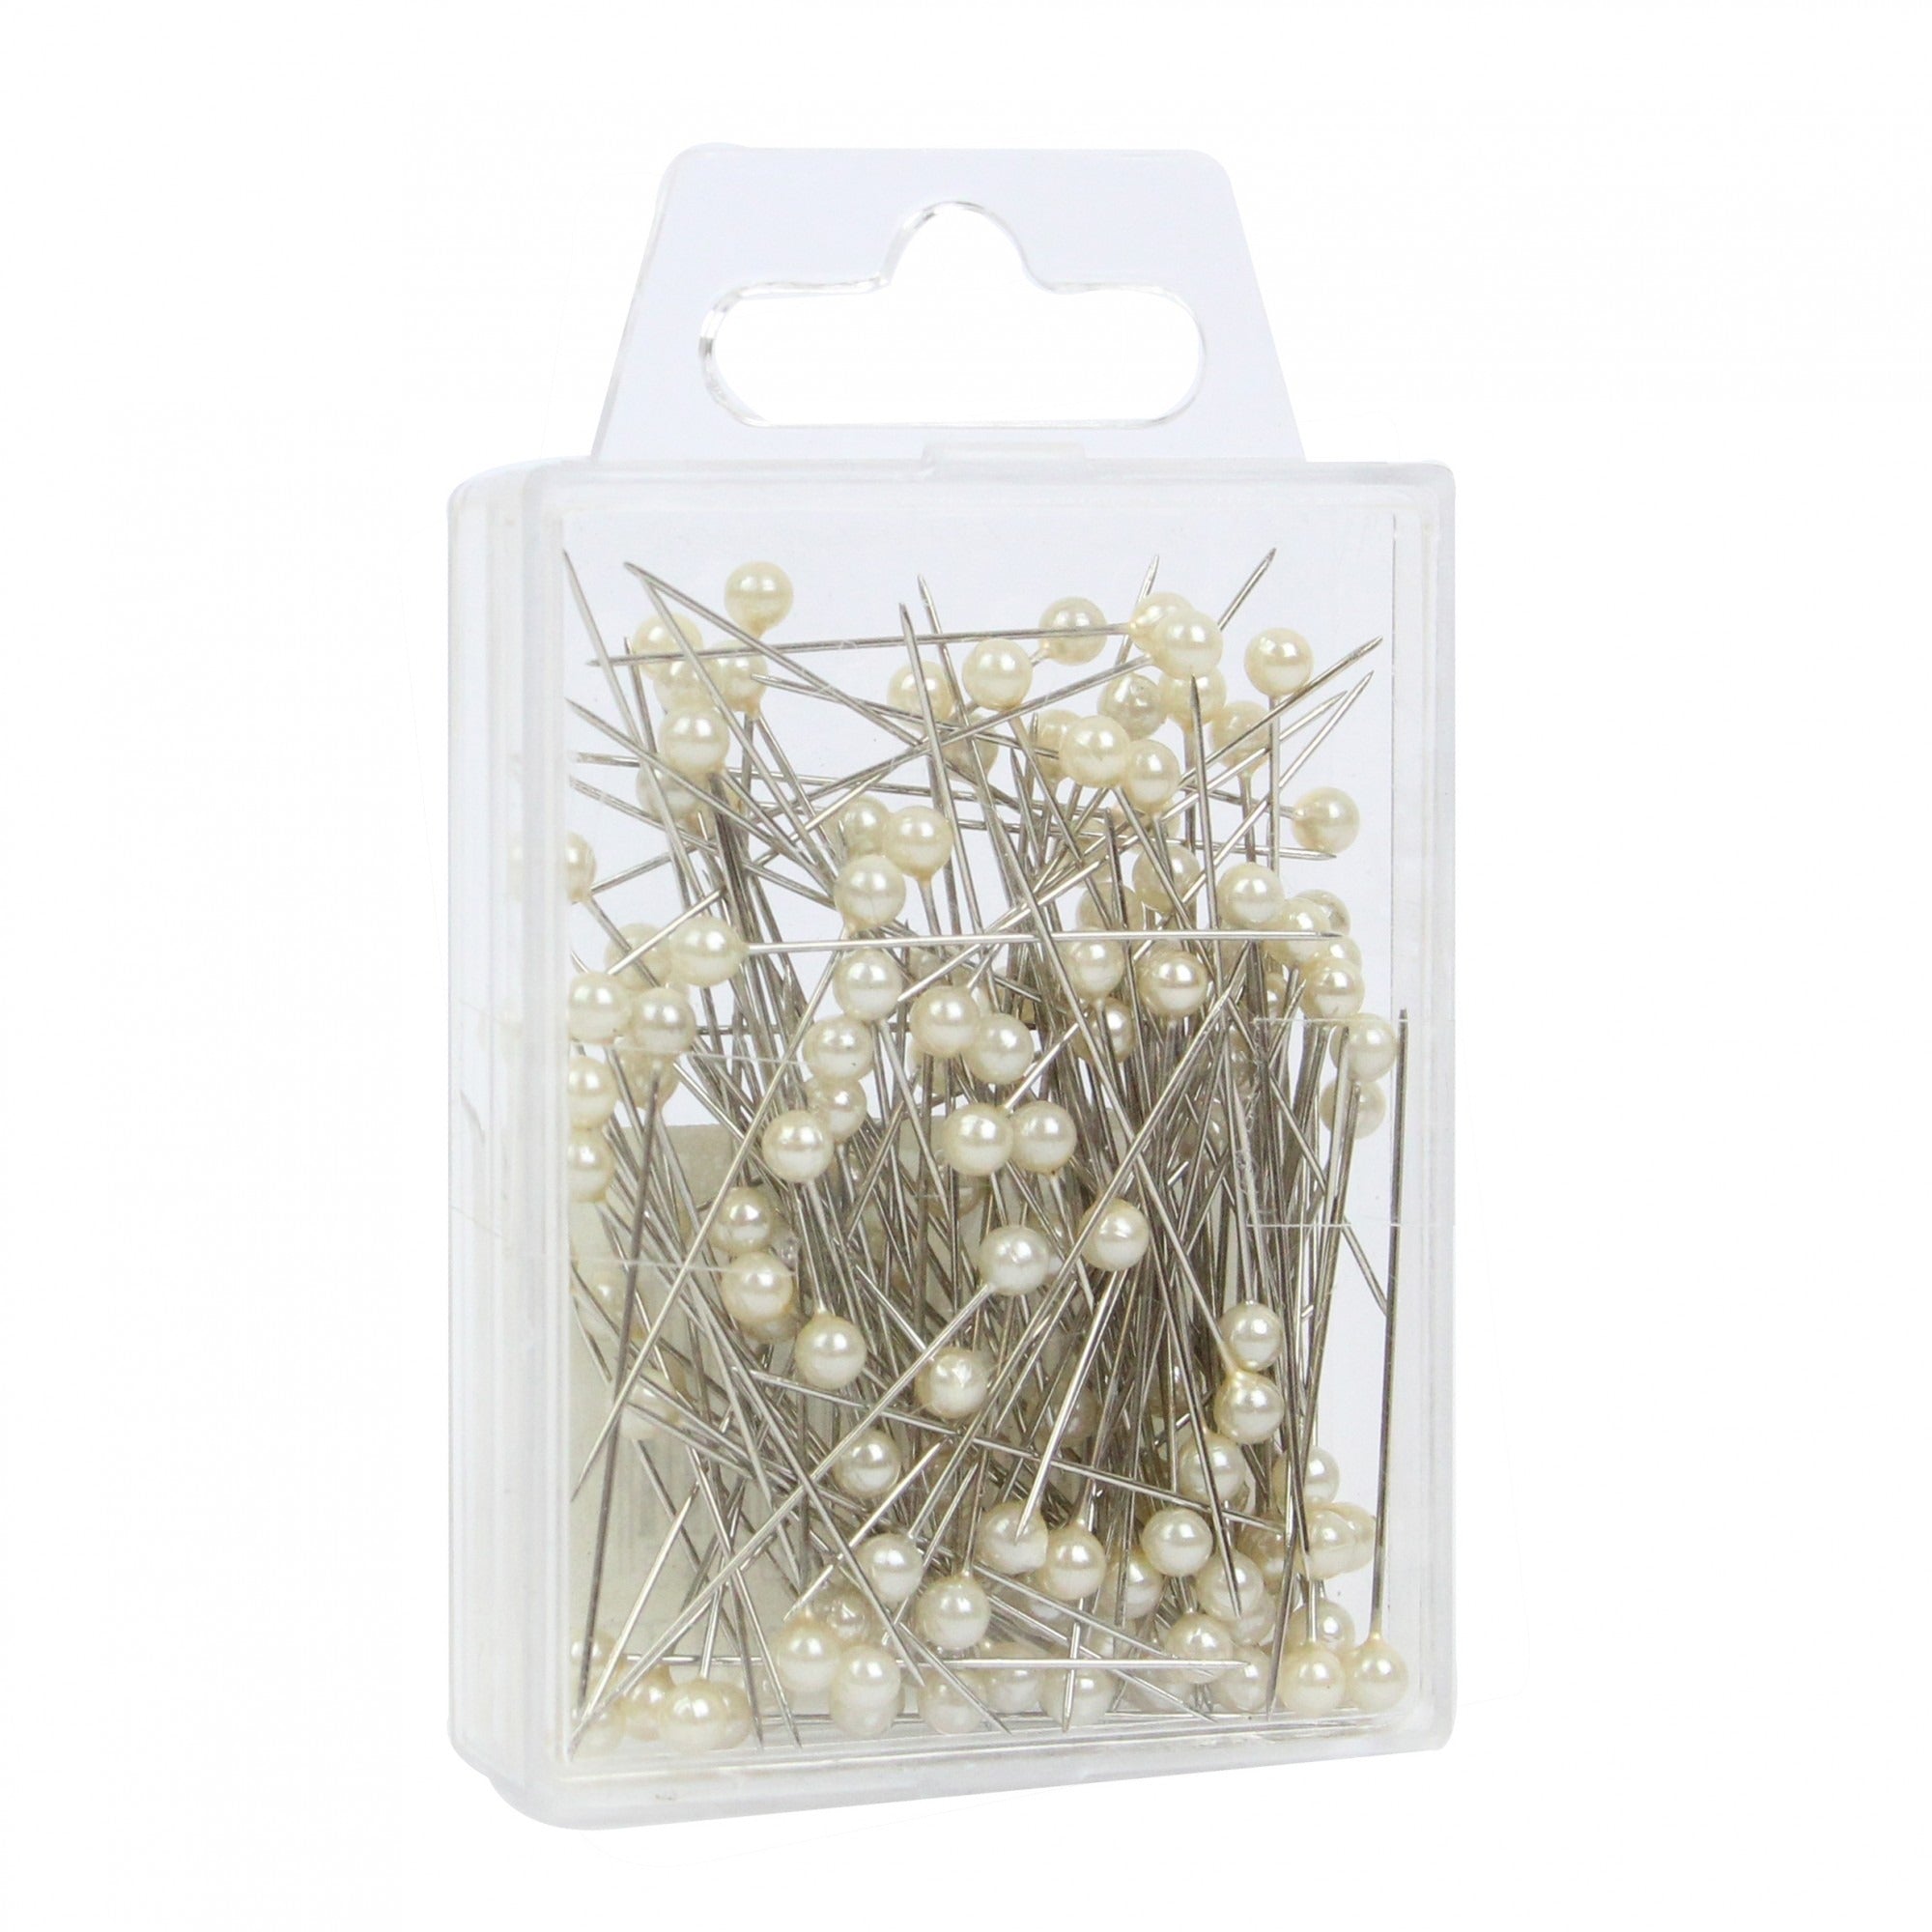 View Ivory 7cm Pearl Headed Pins information